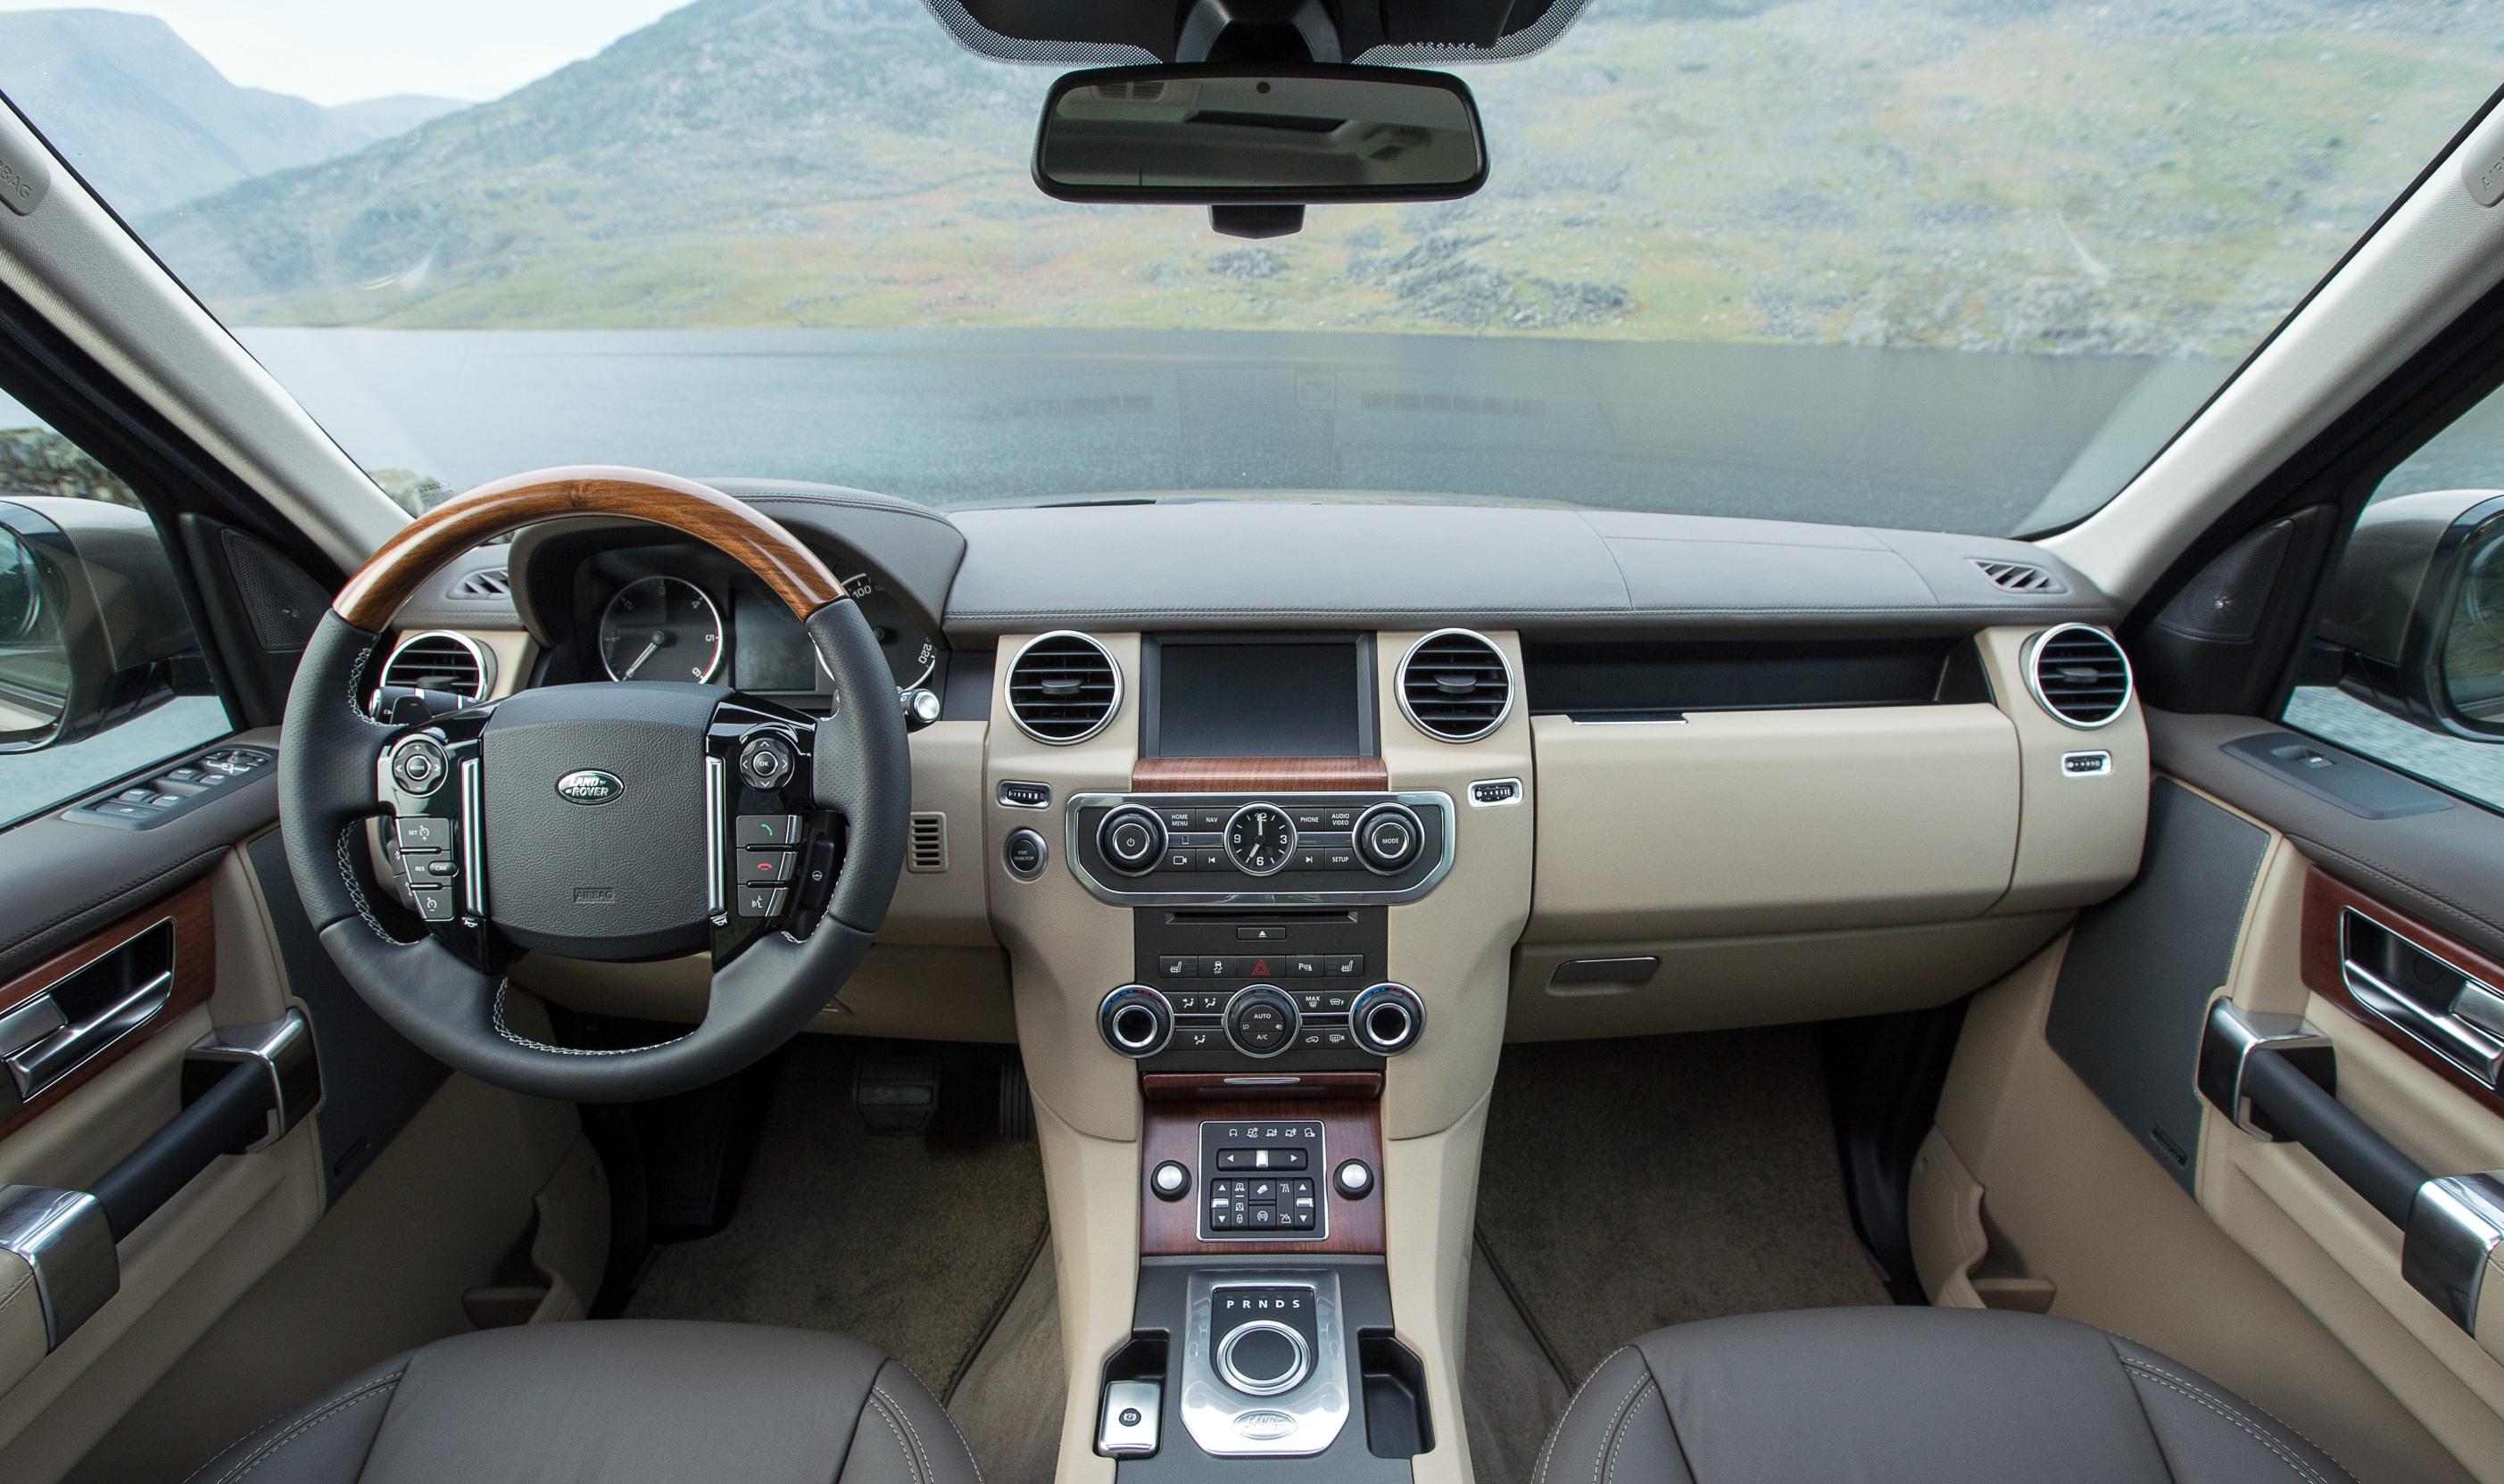 2015 Land Rover Discovery Introduced Details Inside India Car News